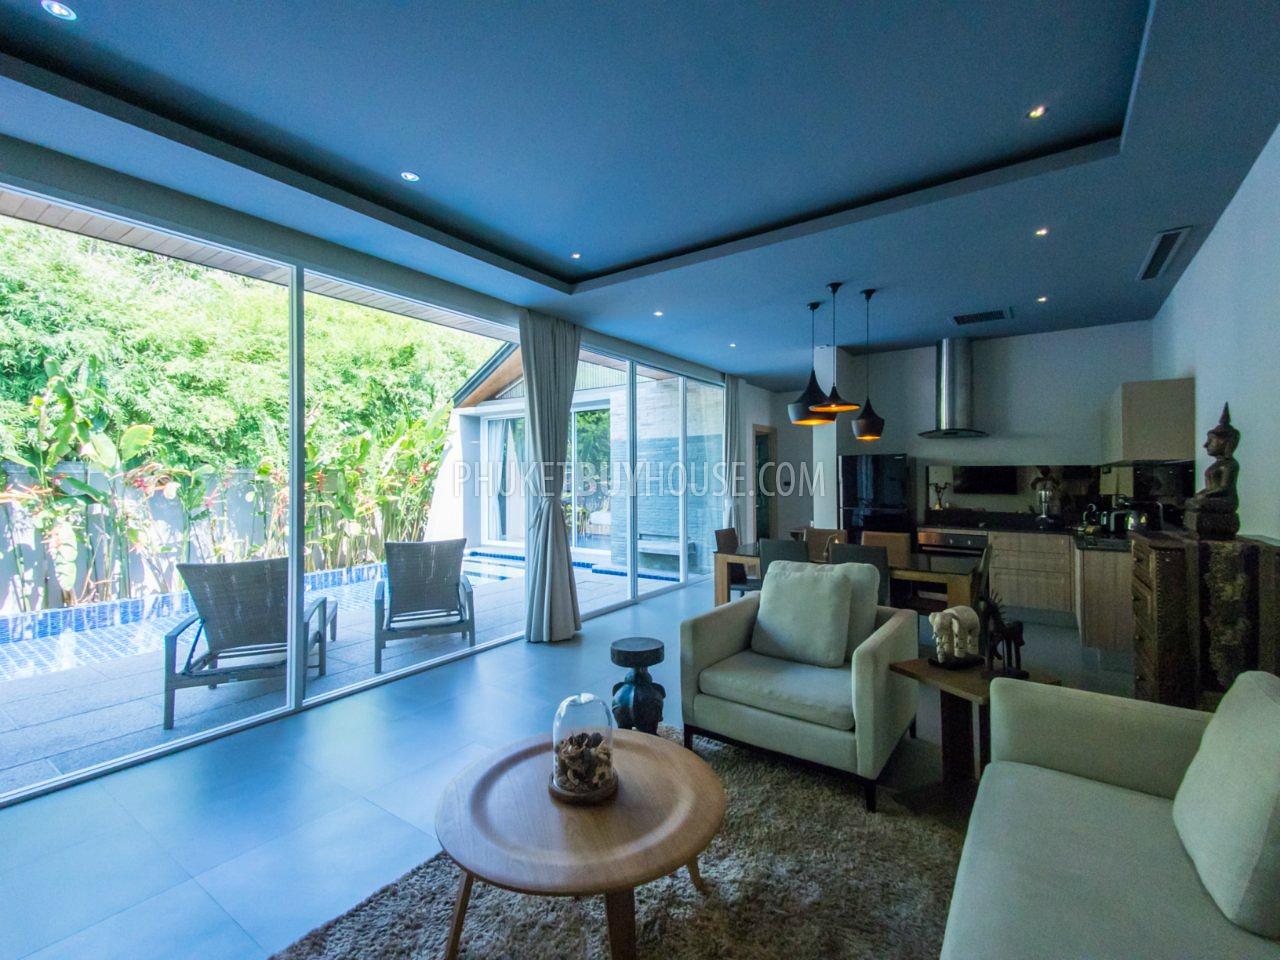 LAY4524: Tropical Modern Villa with 3 bedrooms in Layan. Photo #26